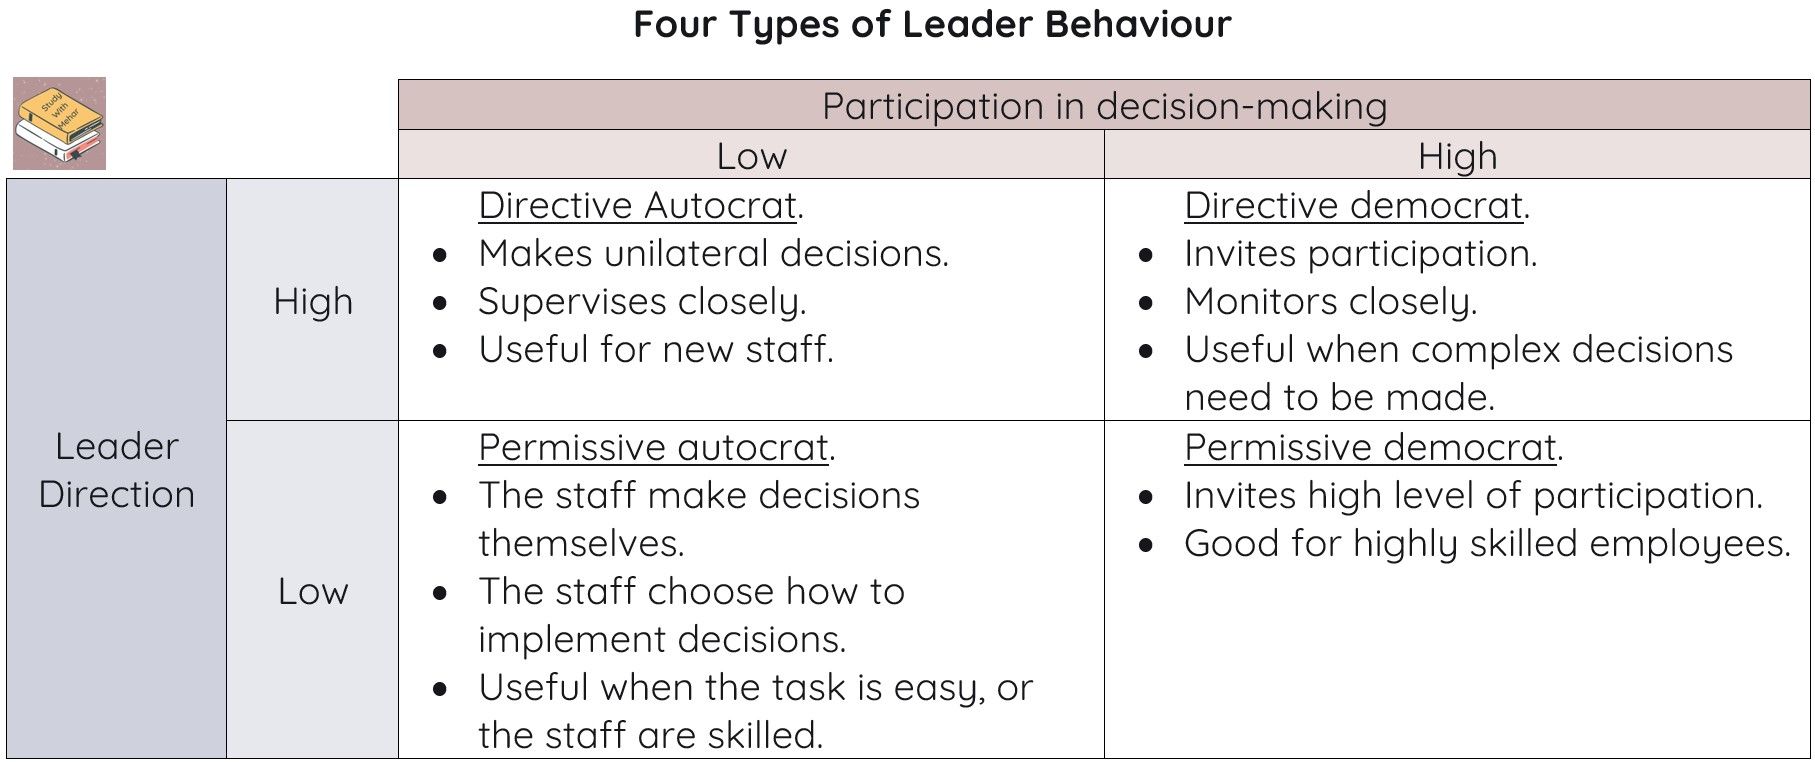 Four-Types-of-Leader-Behaviour---Study-With-Mehar